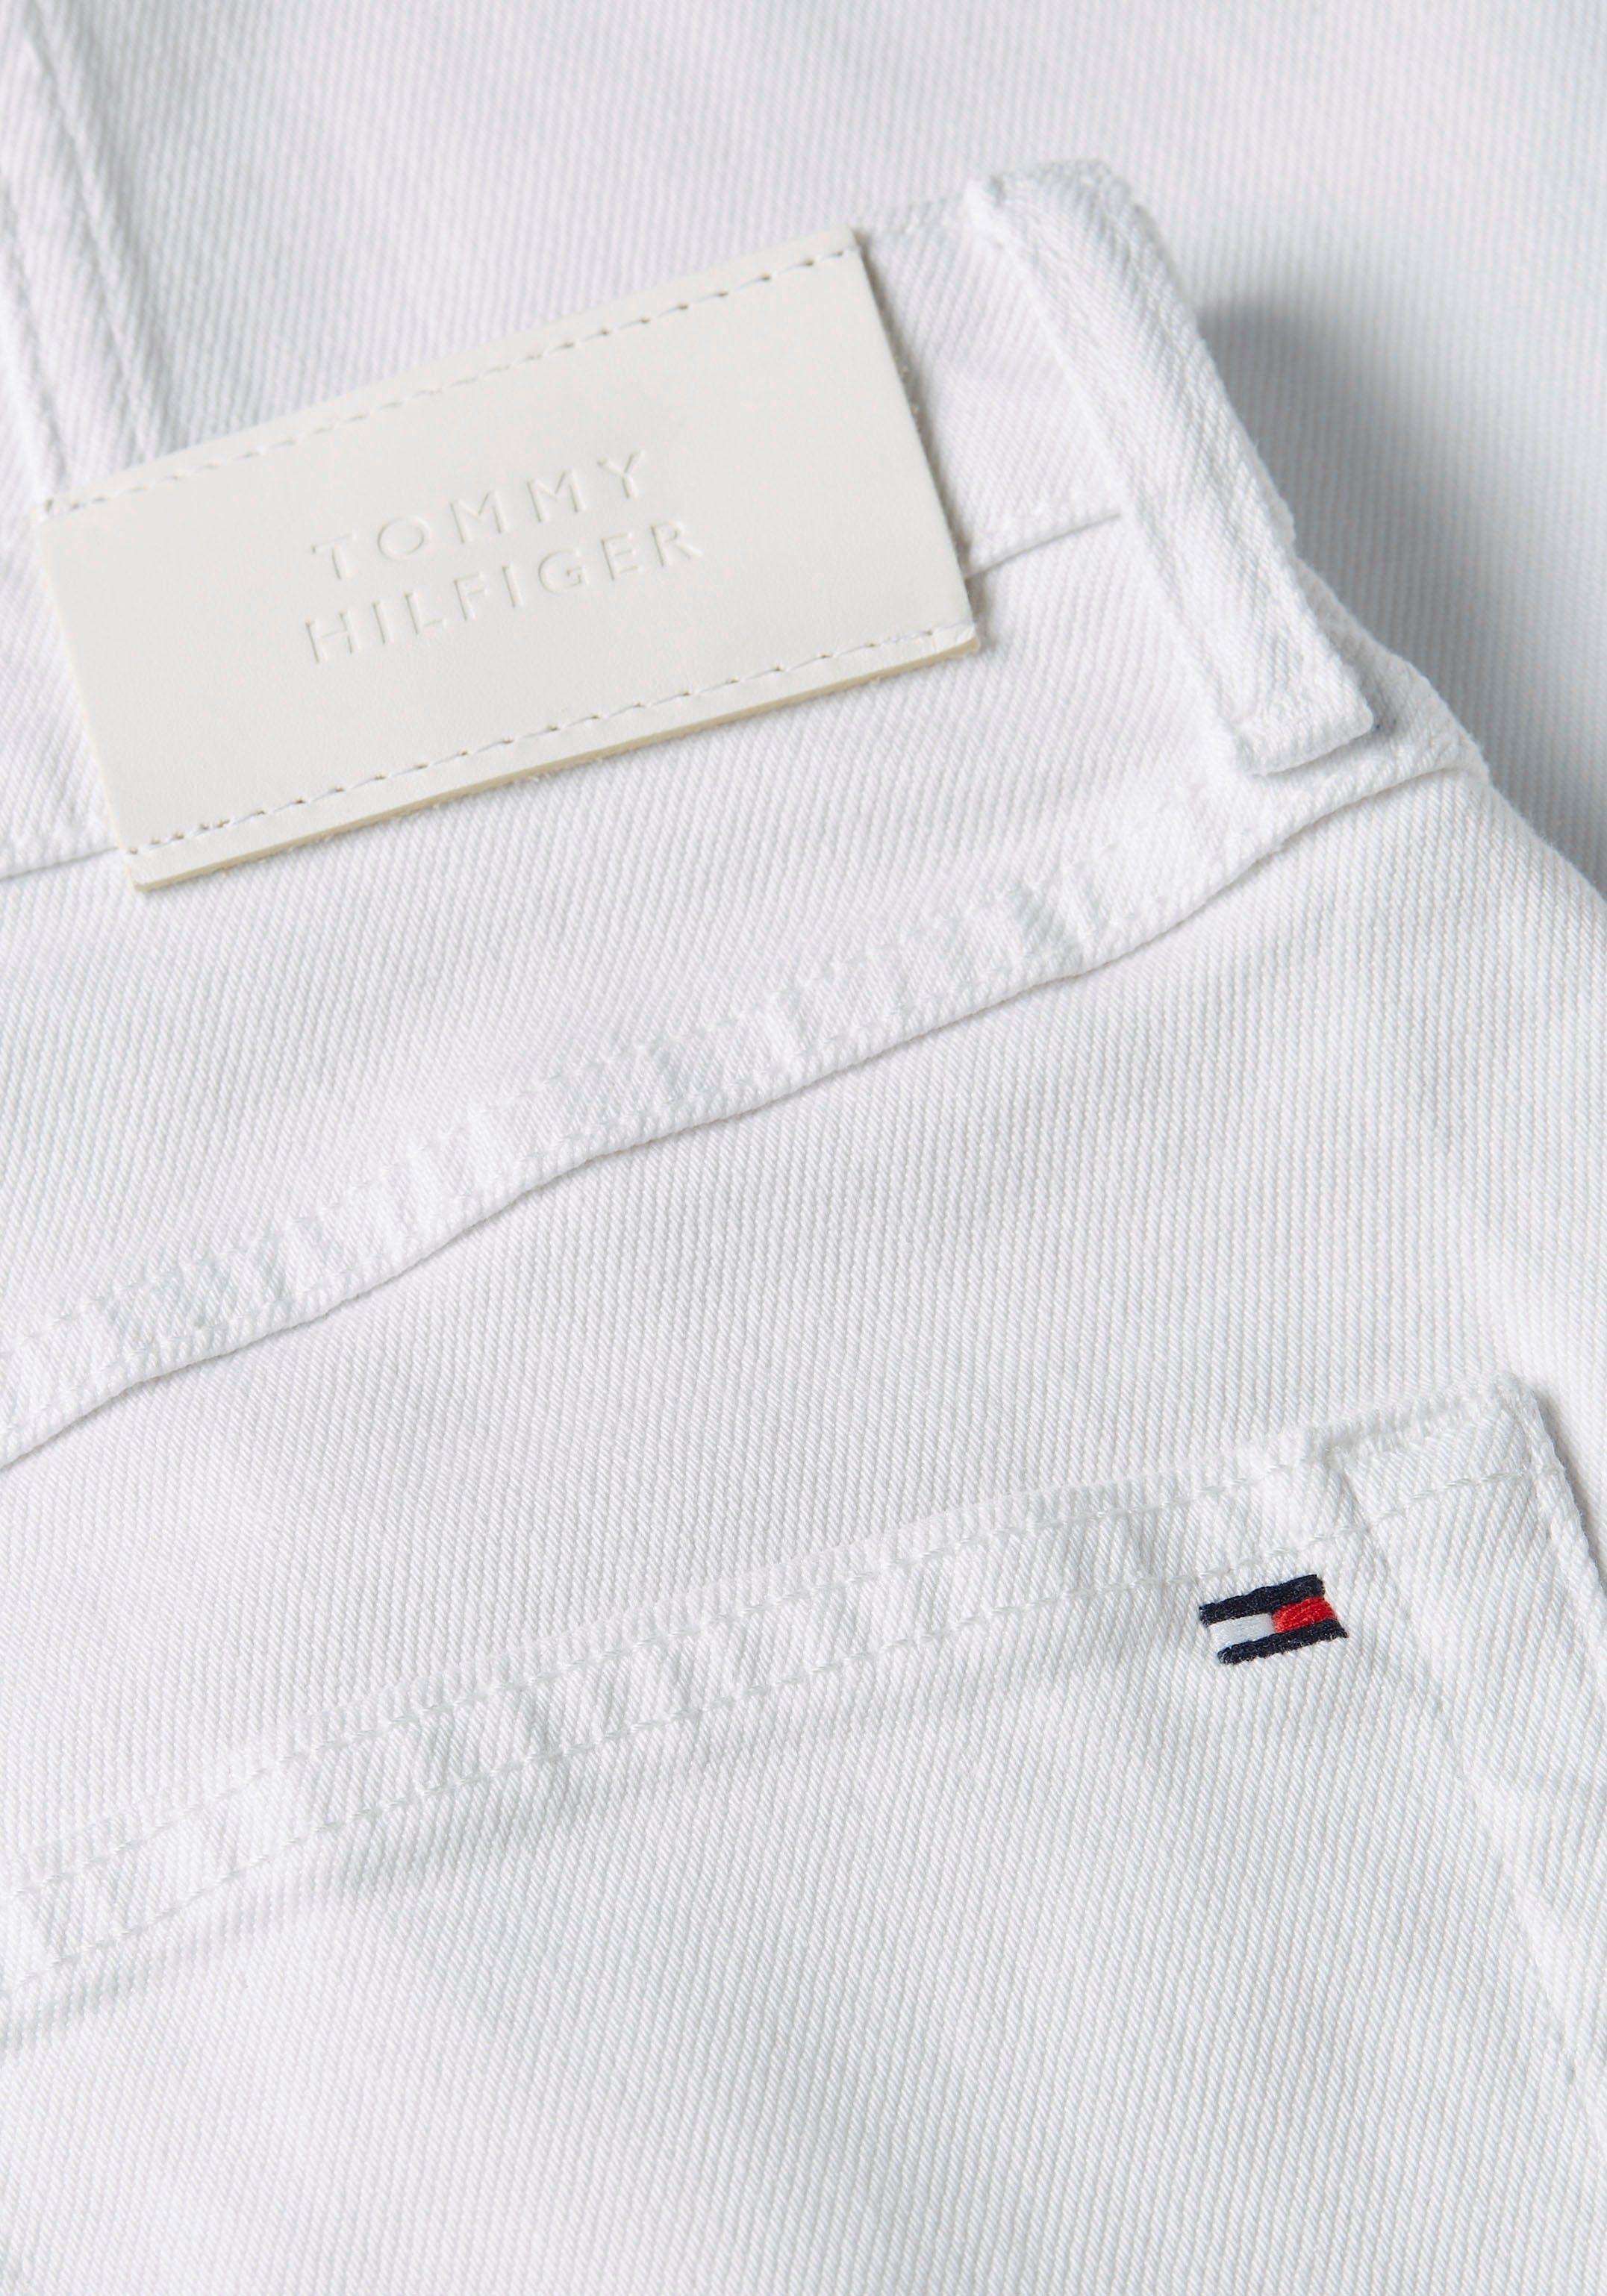 RELAXED weißer Relax-fit-Jeans white Hilfiger Waschung PAM HW Optic in Tommy STRAIGHT